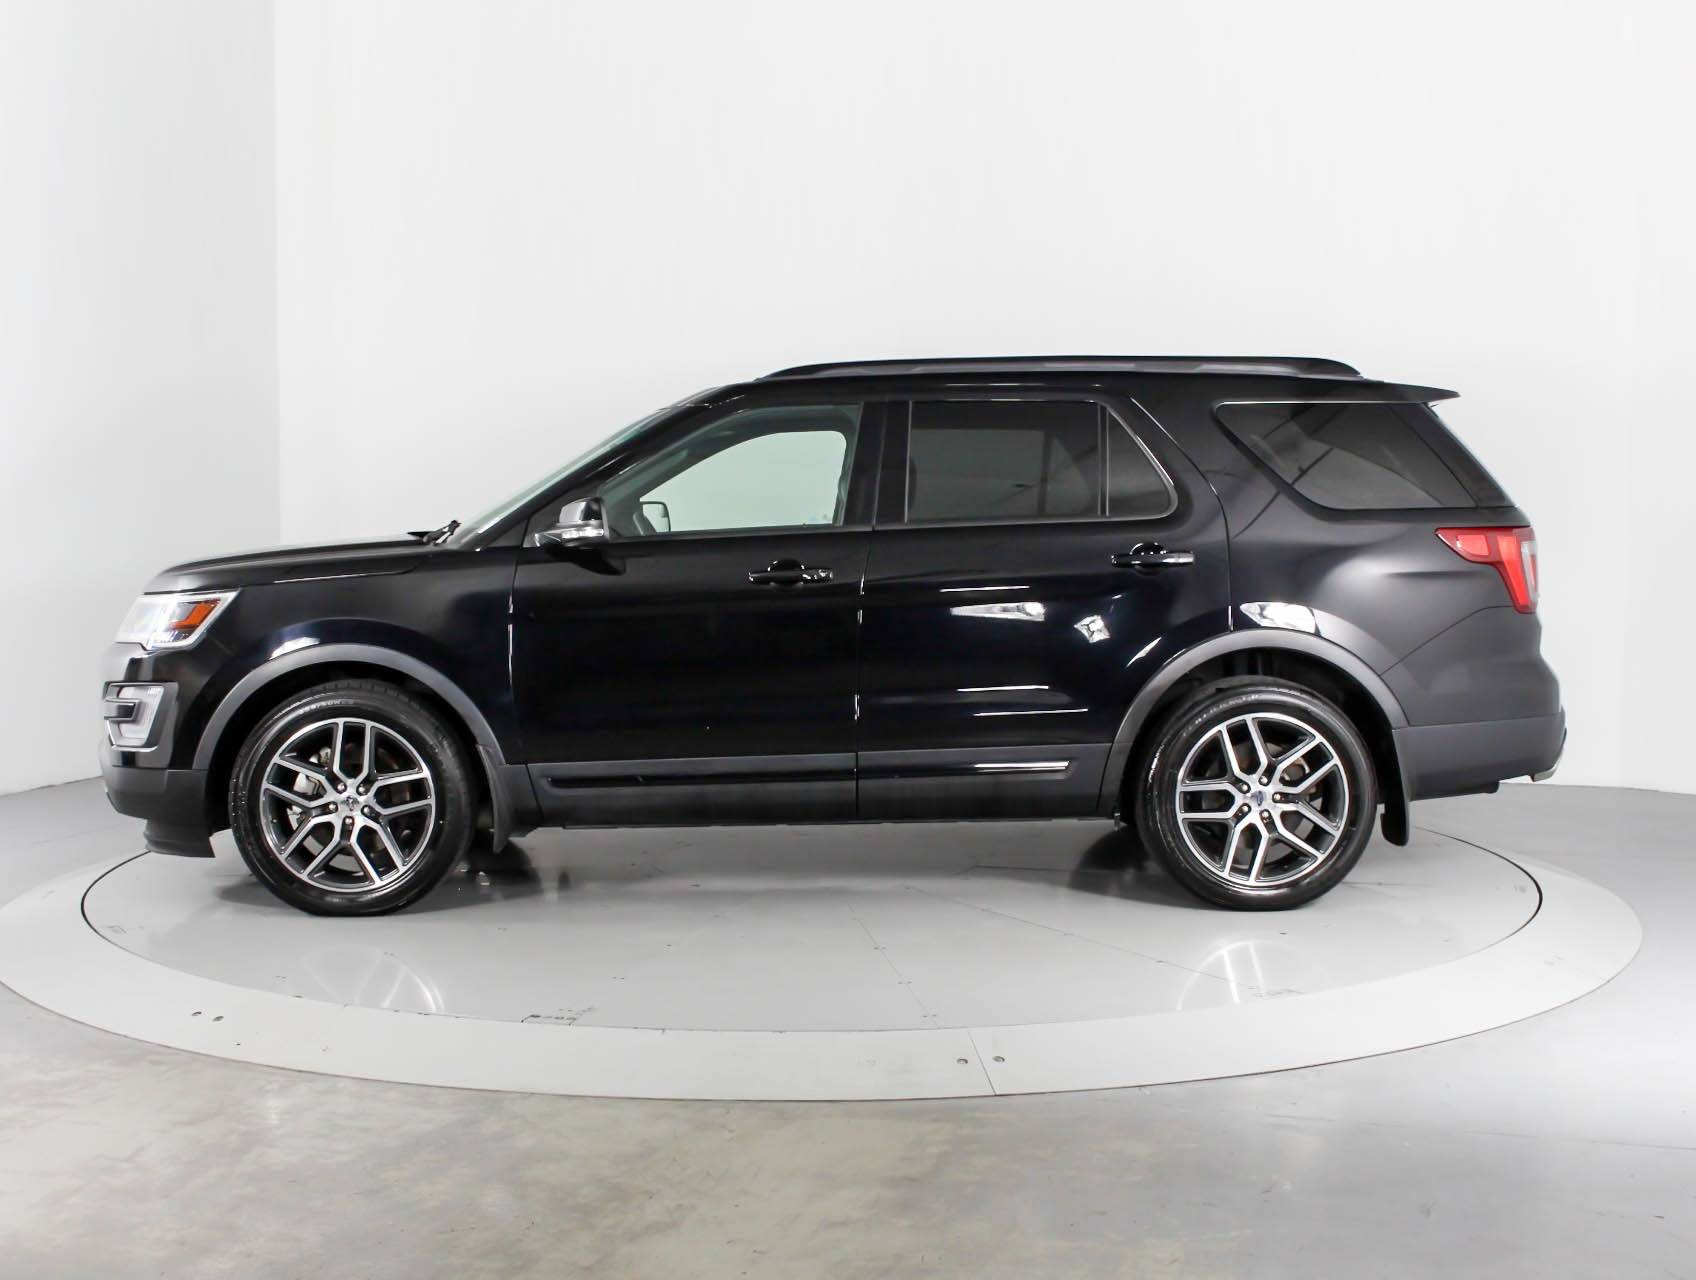 Florida Fine Cars - Used FORD EXPLORER 2016 WEST PALM SPORT